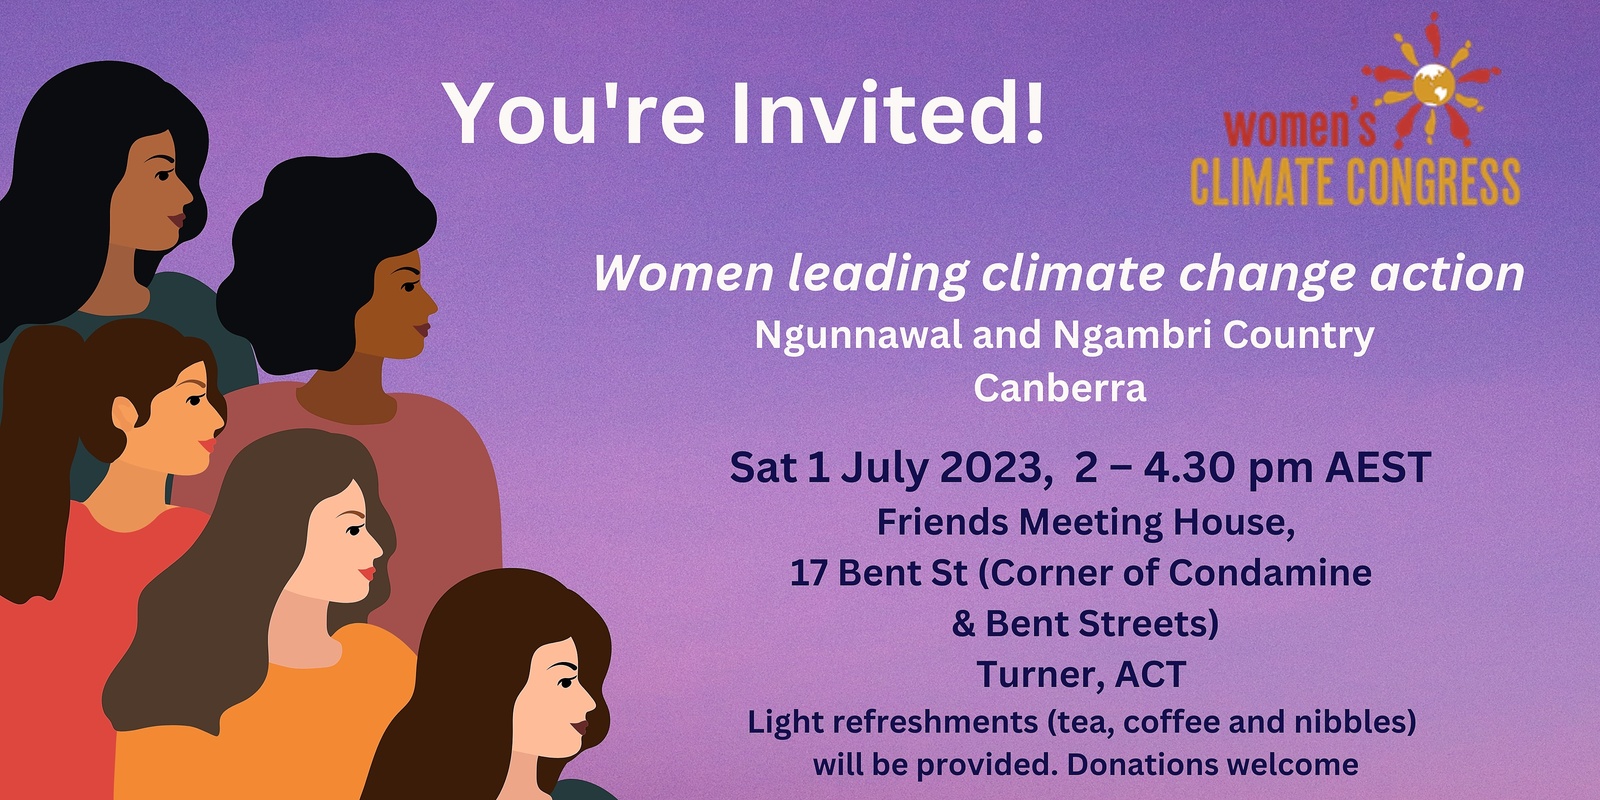 Women leading climate change action - Ngunnawal and Ngambri Country ...